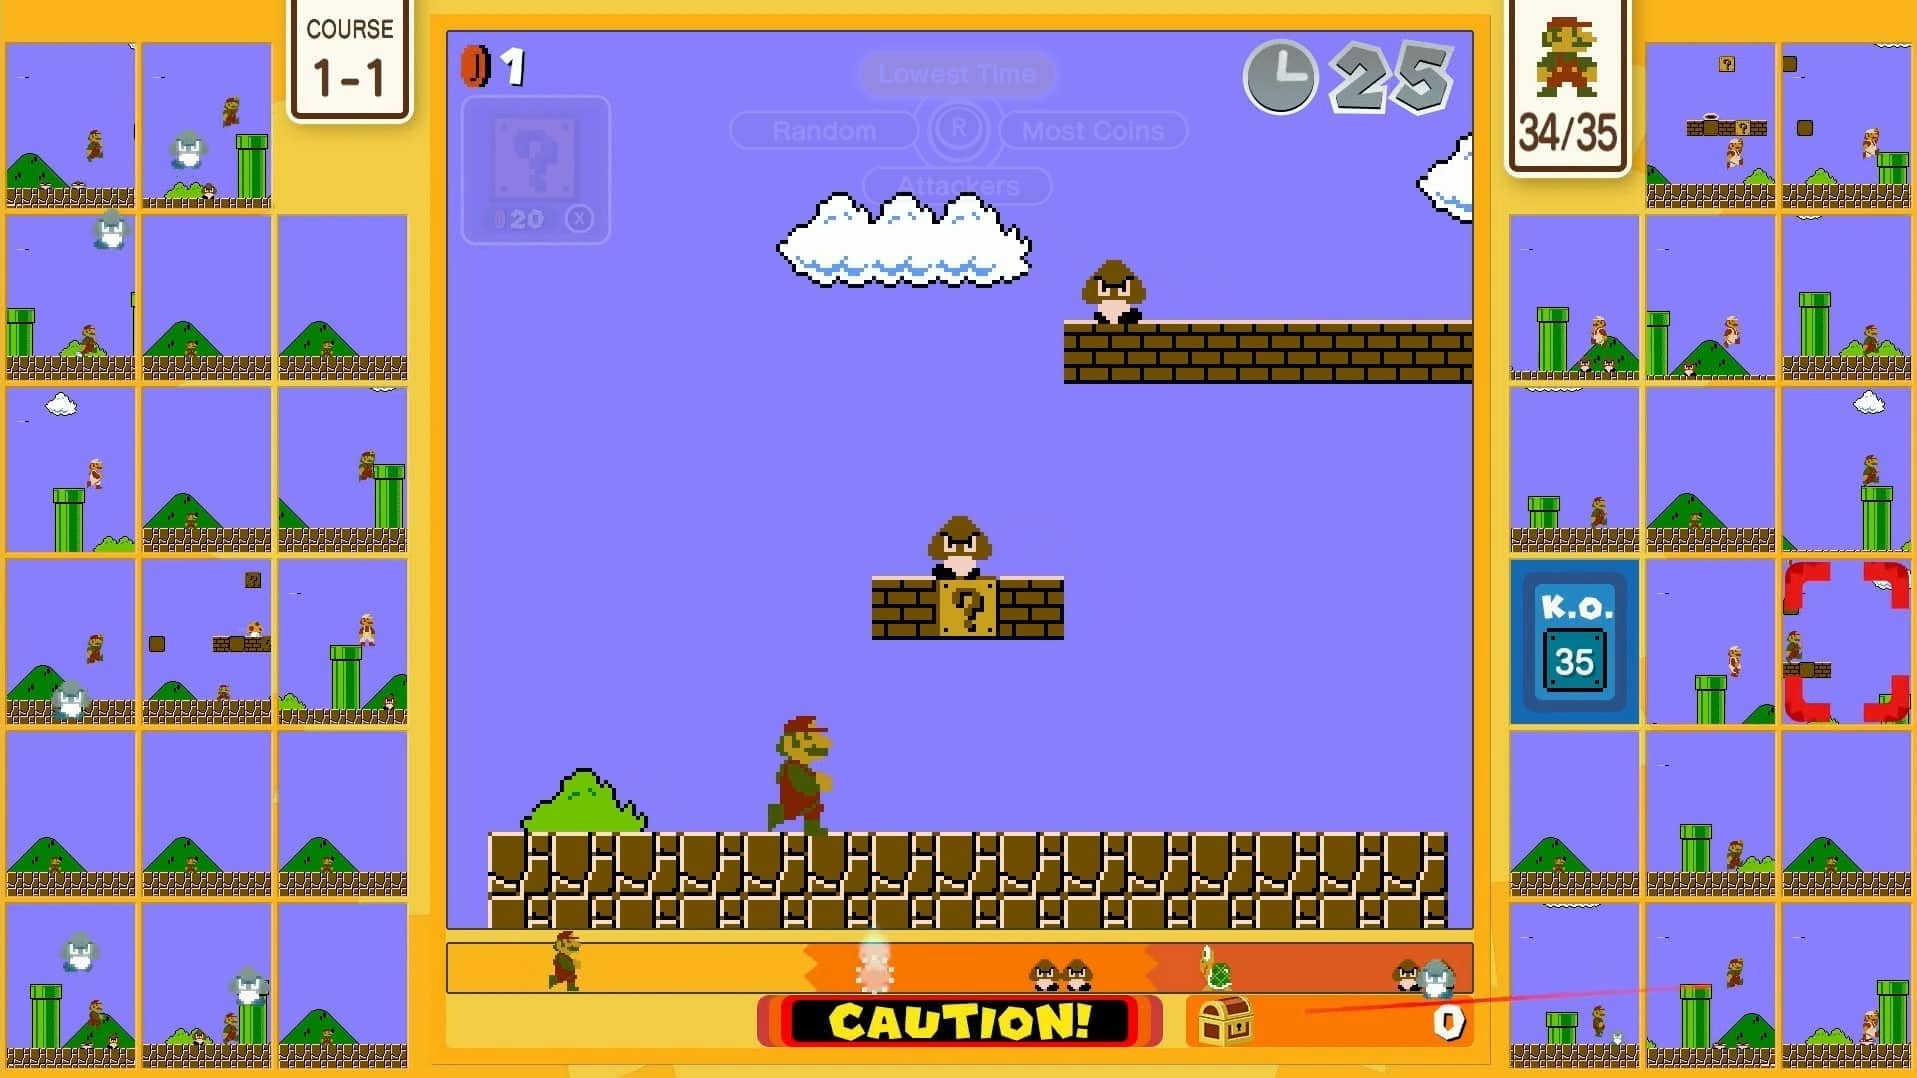 Super Mario Bros. 35 Proves that Nintendo Should Experiment with Its Past More Often